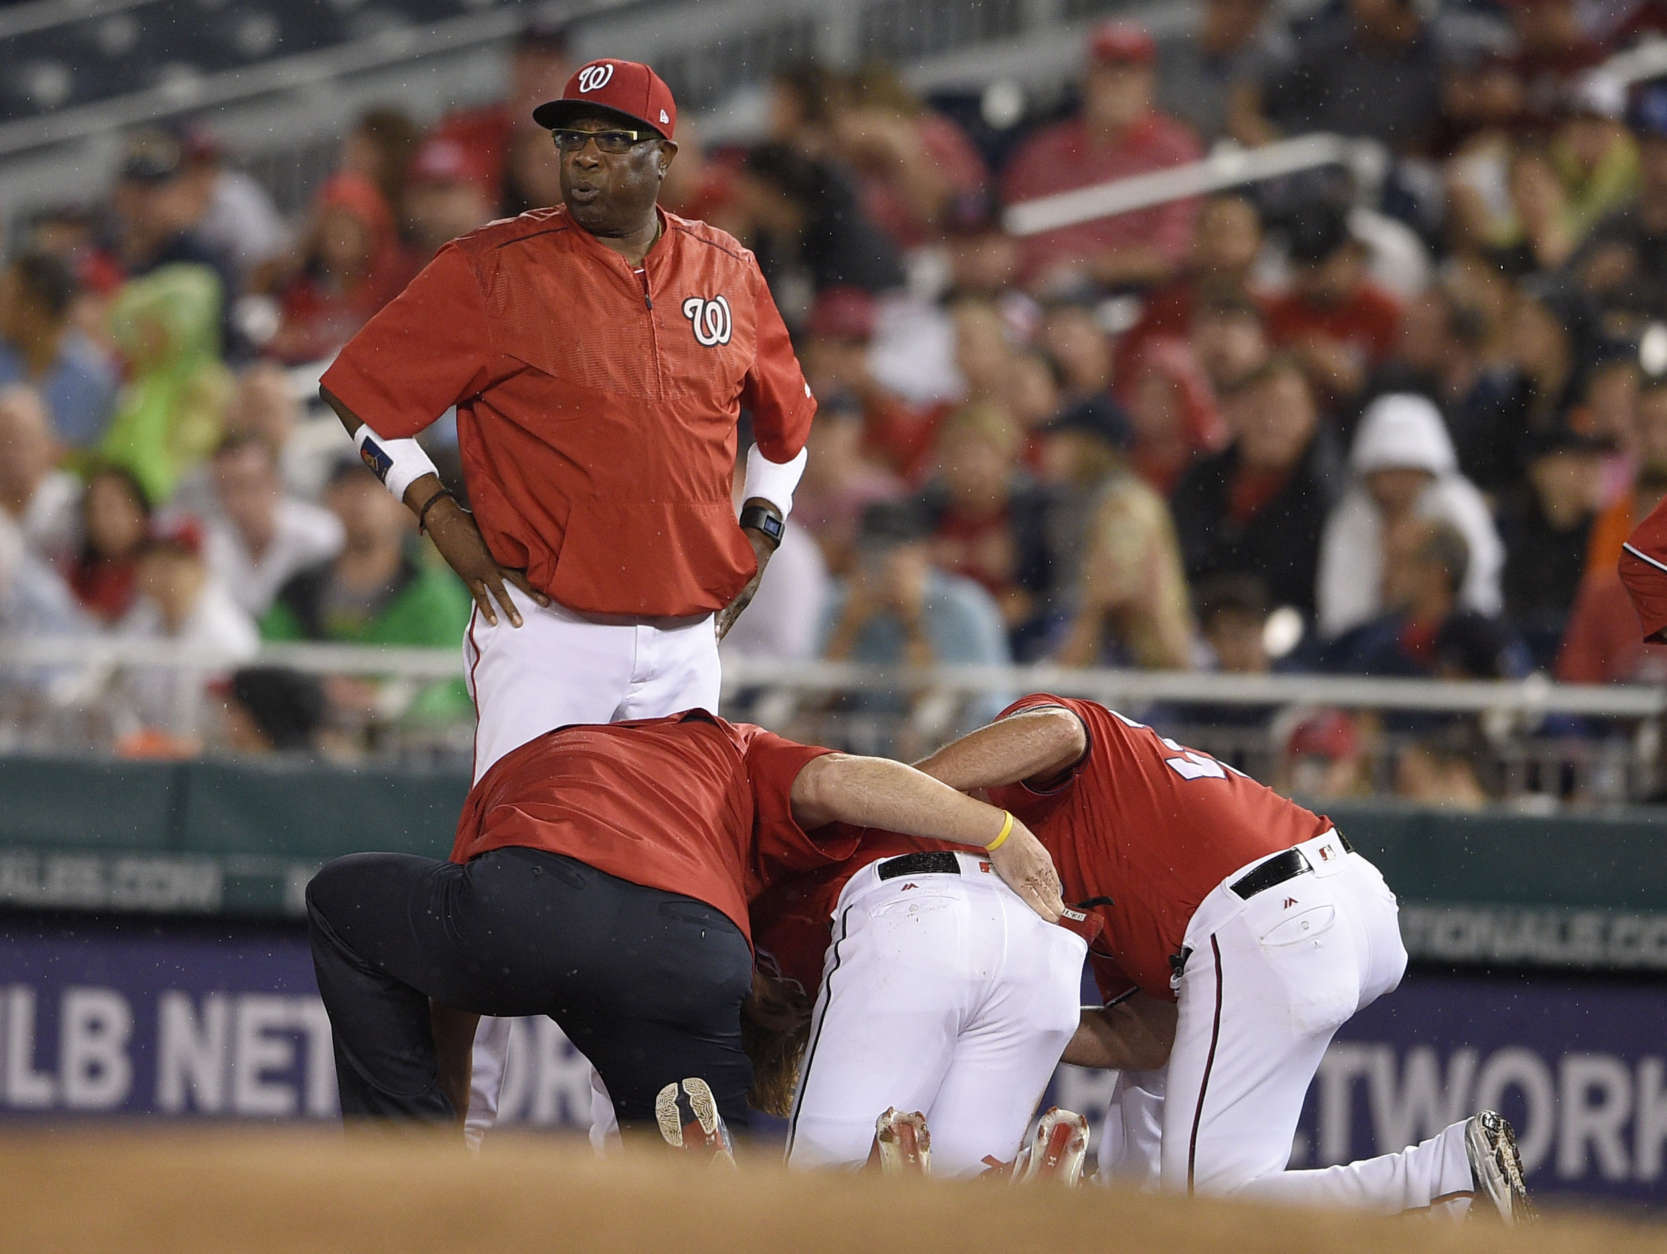 Washington Nationals manager Dusty Baker, top, stands on the field as Bryce Harper, bottom center, receives attention after he was injured during the first inning of a baseball game against the San Francisco Giants, Saturday, Aug. 12, 2017, in Washington. (AP Photo/Nick Wass)